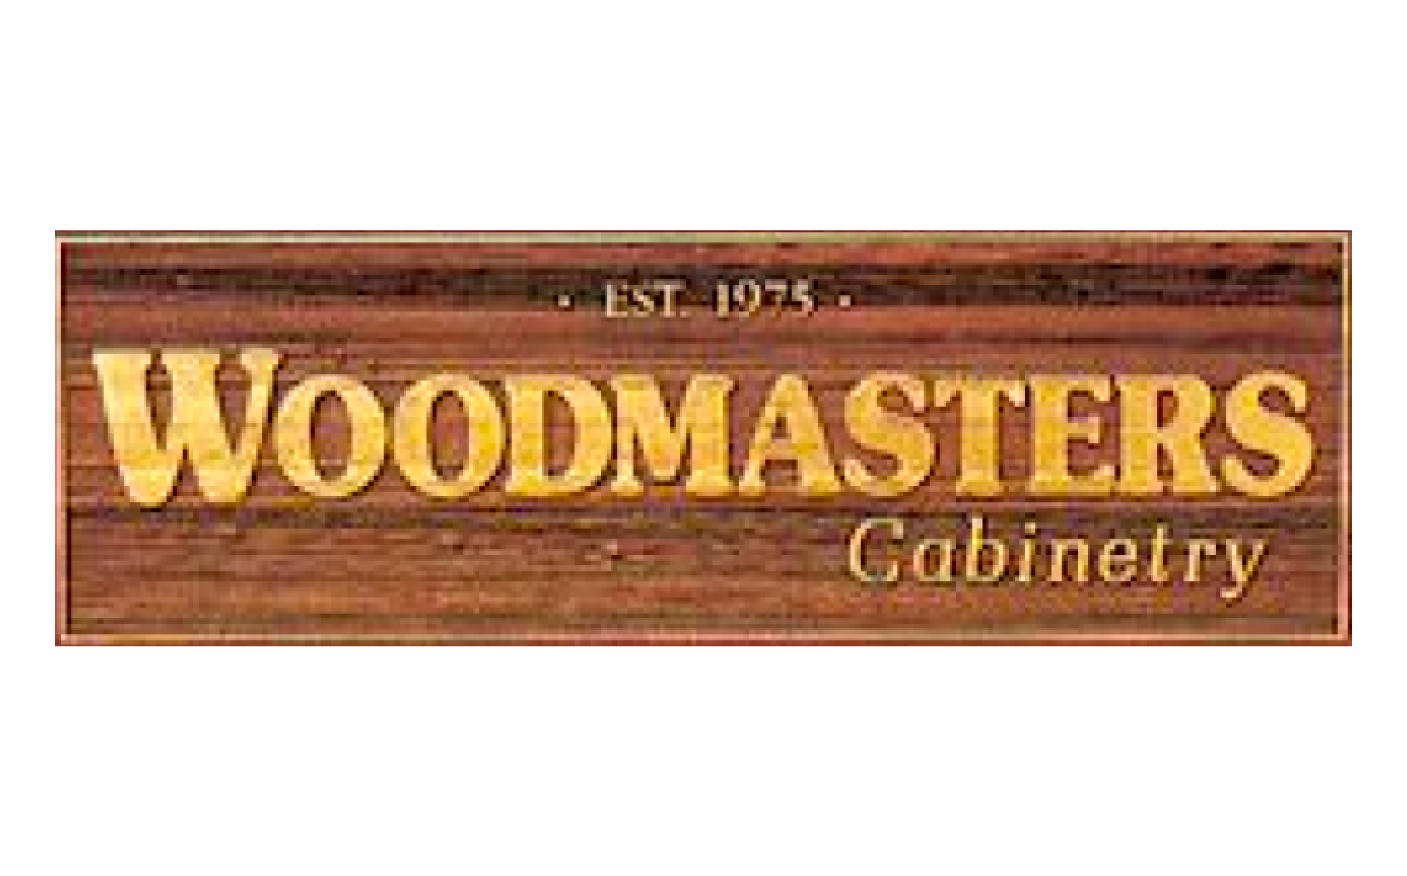 Woodmasters Cabinetry